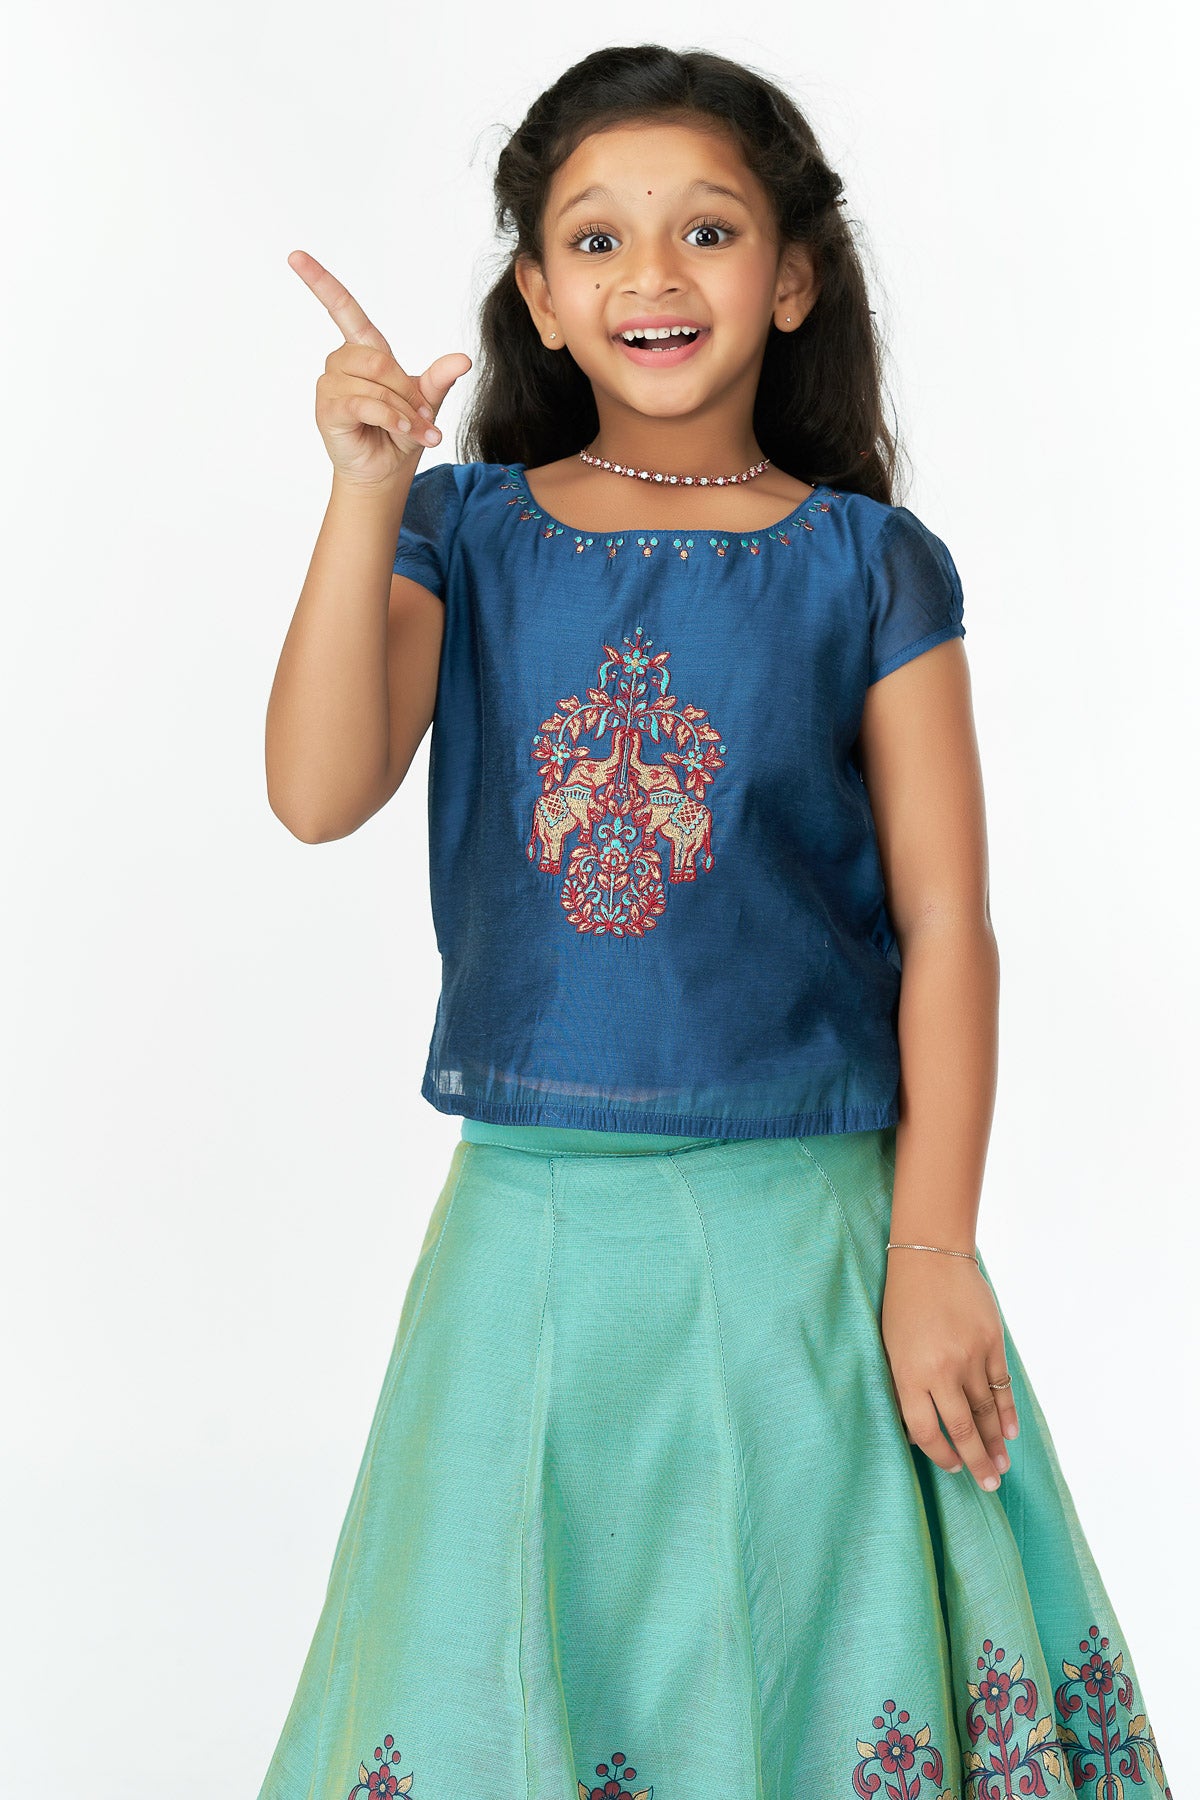 Contrast Placement Elephant & Floral Motif Embroidered Top & Floral Printed Skirt Set - Blue & Green